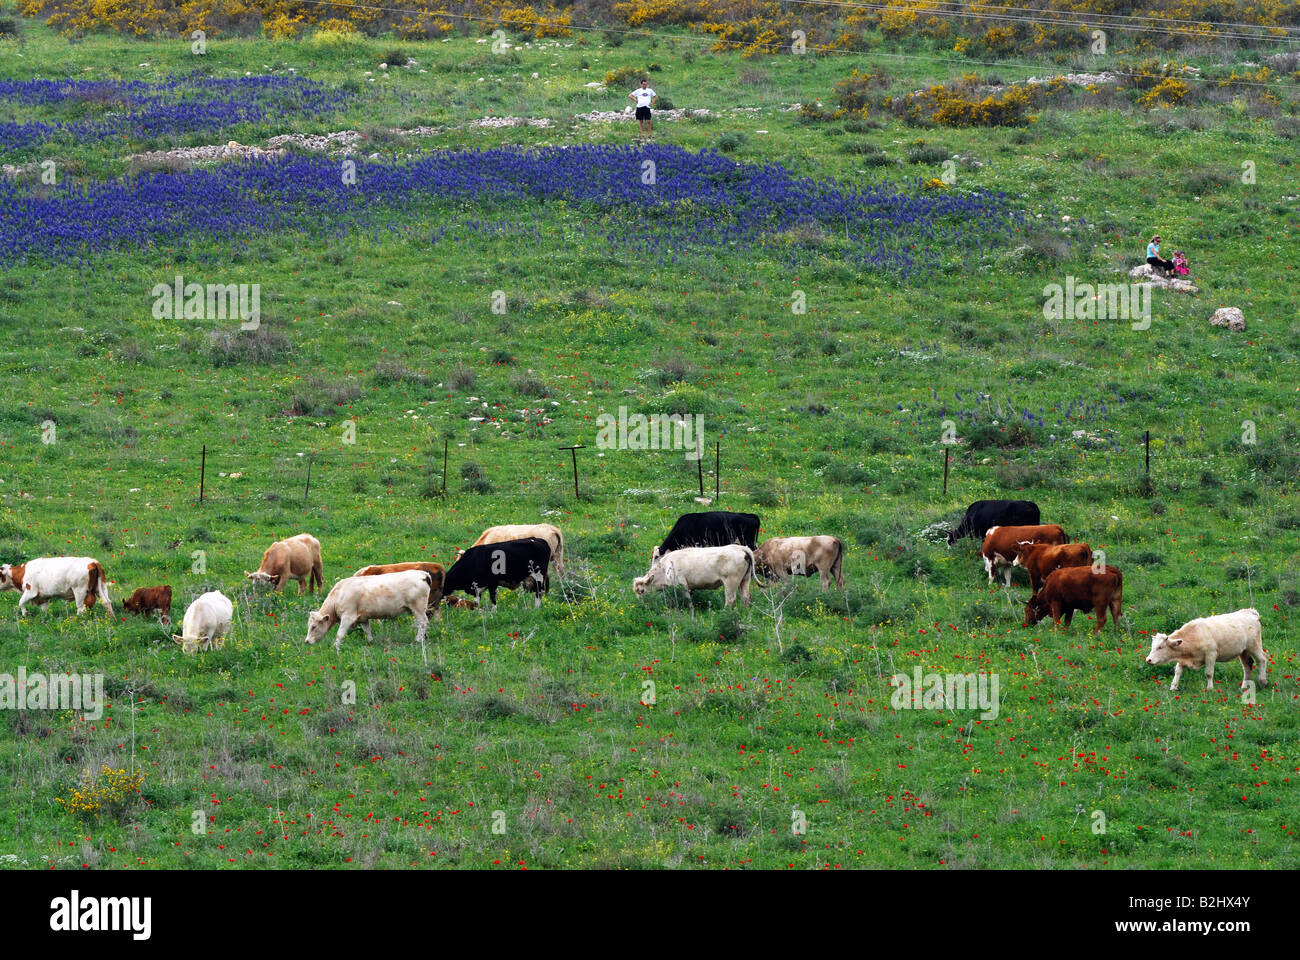 Cows grazing in a blooming spring field blue lupin Stock Photo